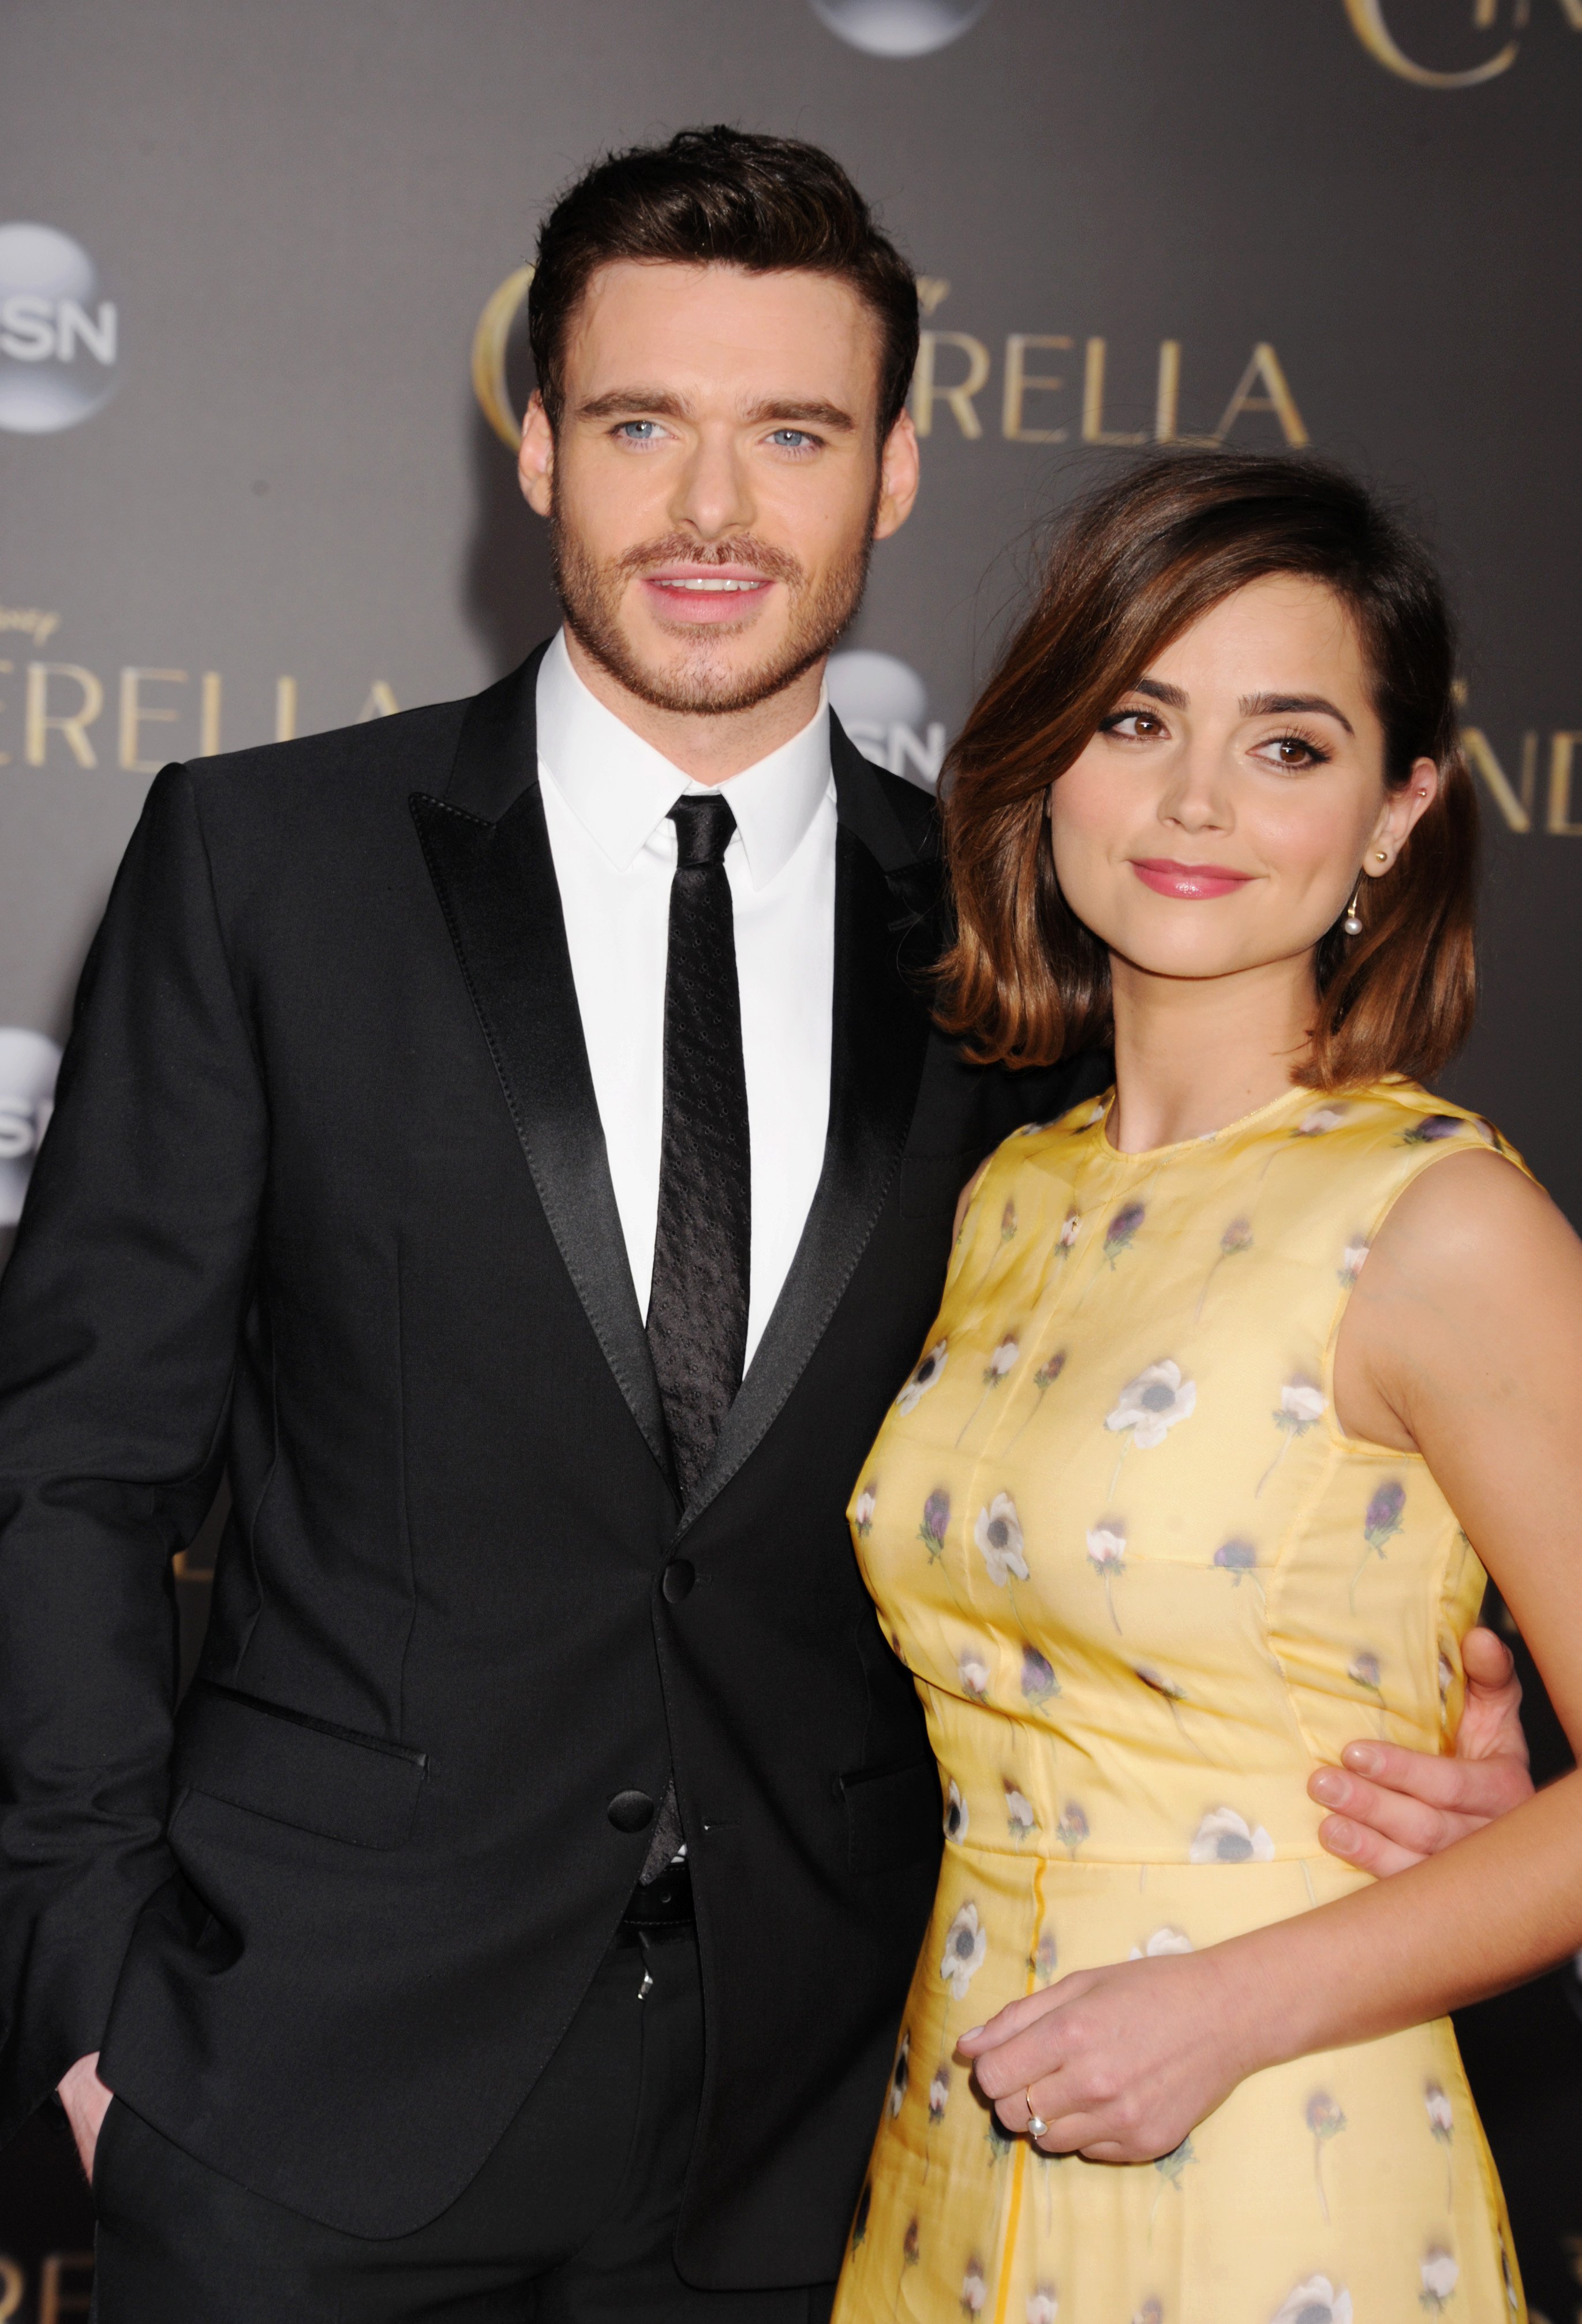 Richard Madden and Jenna Coleman at the World Premiere for 